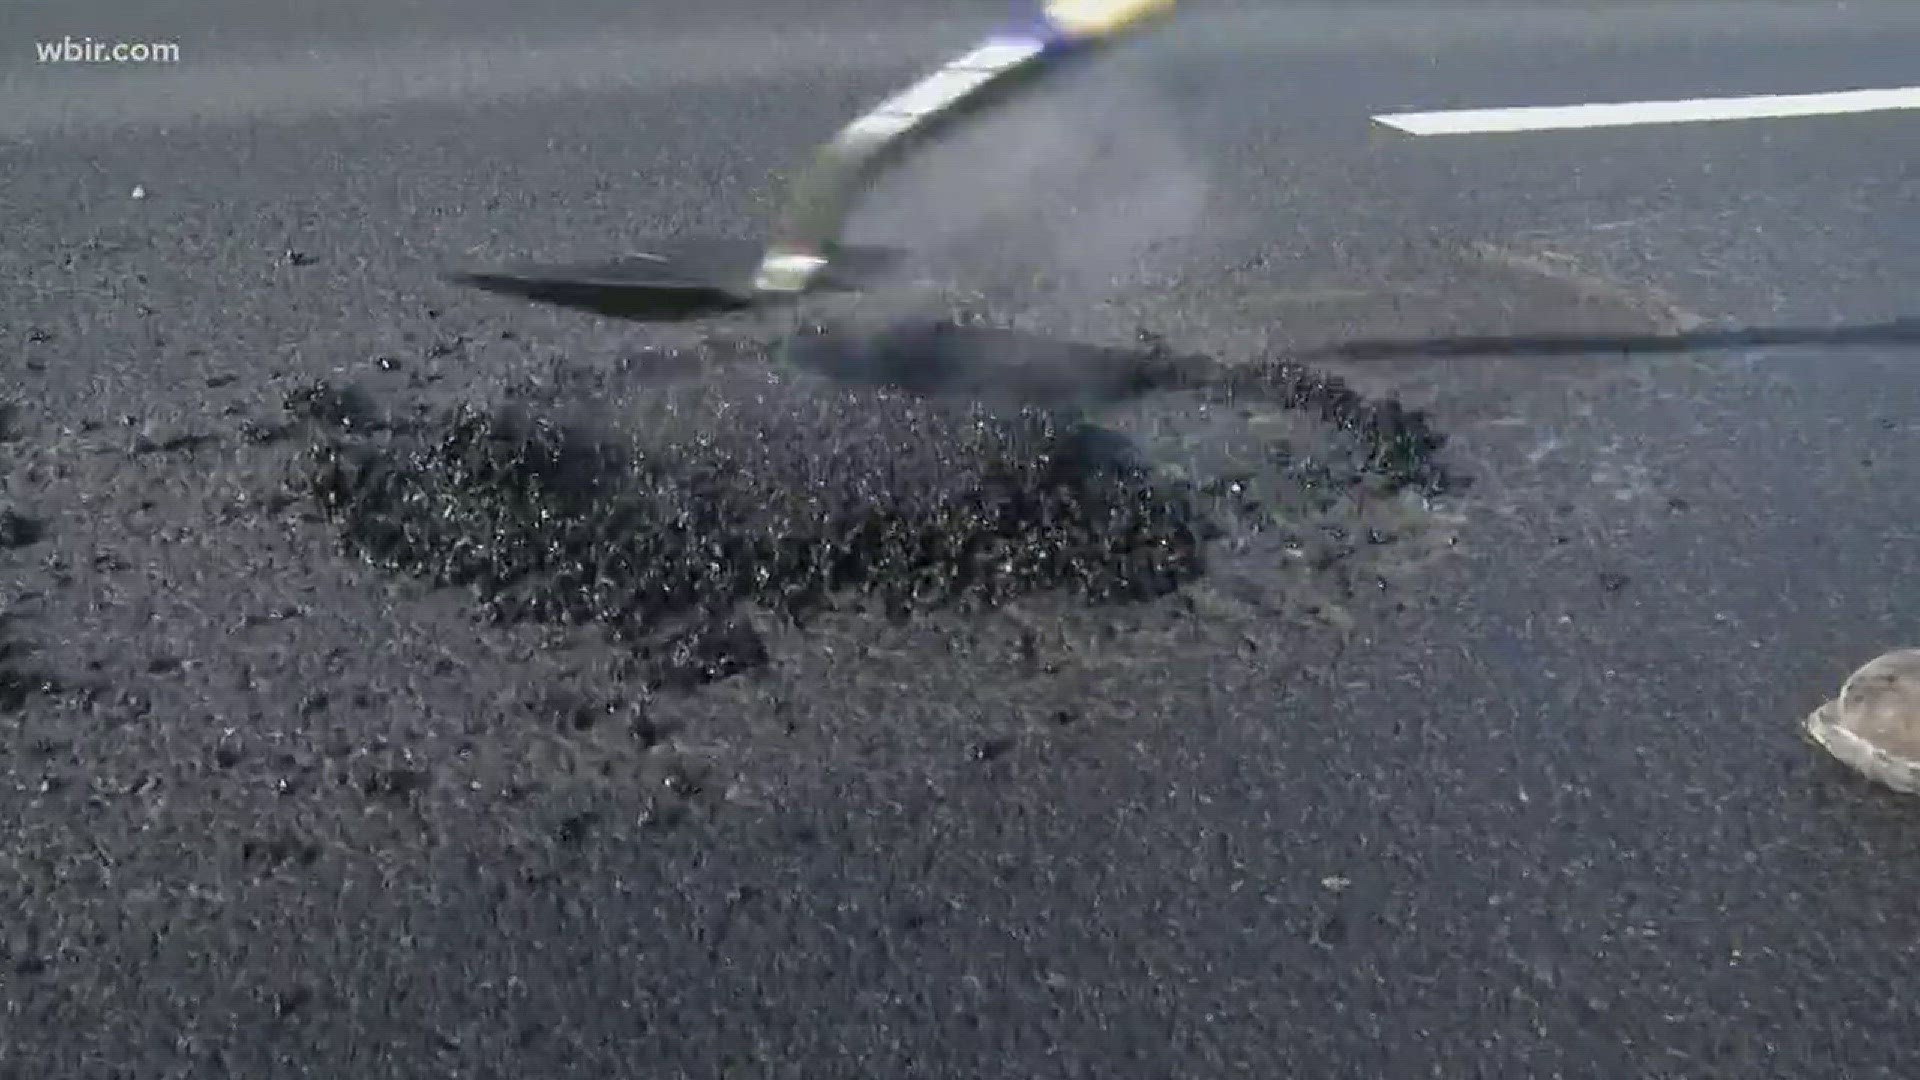 Repair shops are seeing a rise in damage claims from those pesky holes in the roads.